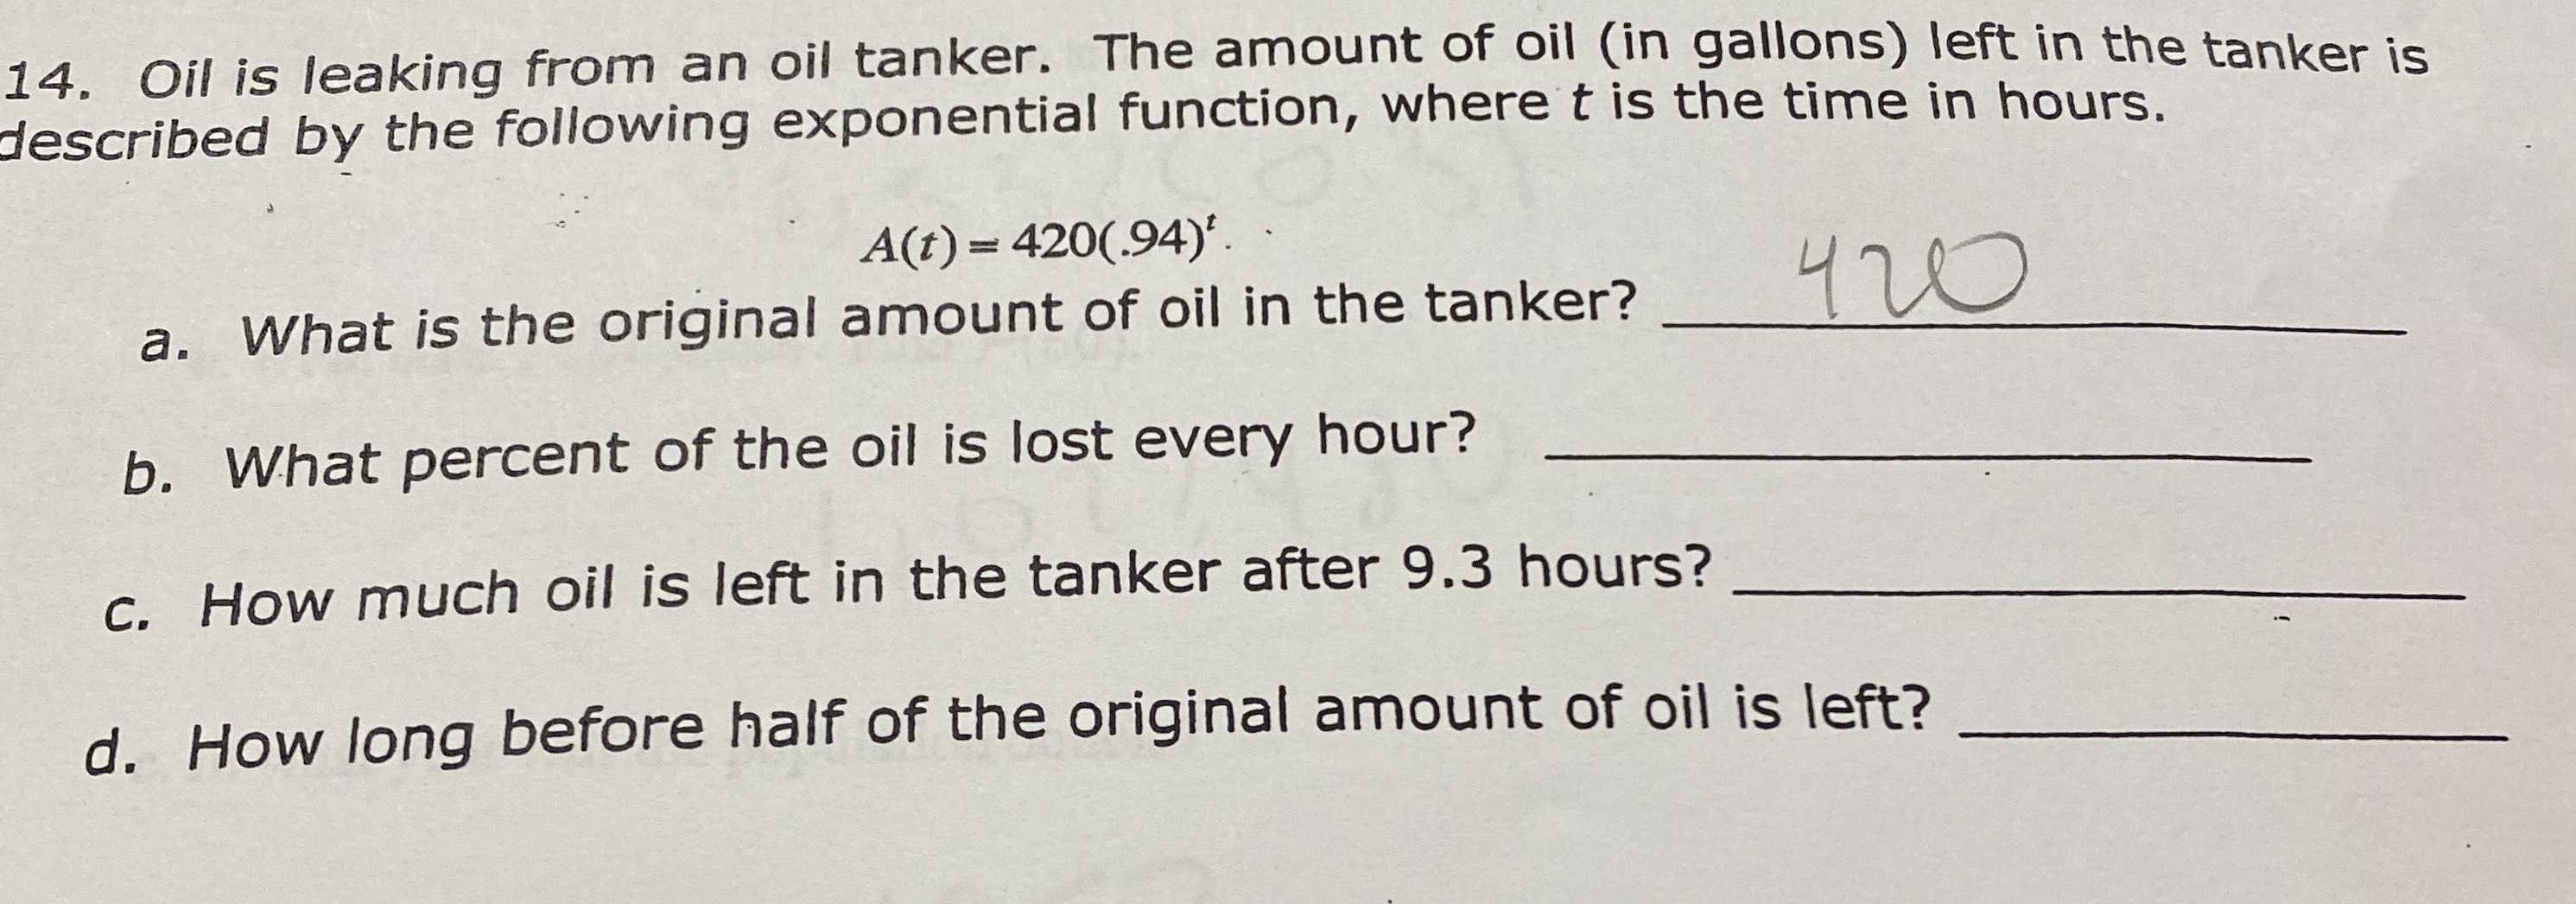 14. Oil is leaking from an oil tanker. The amount ...